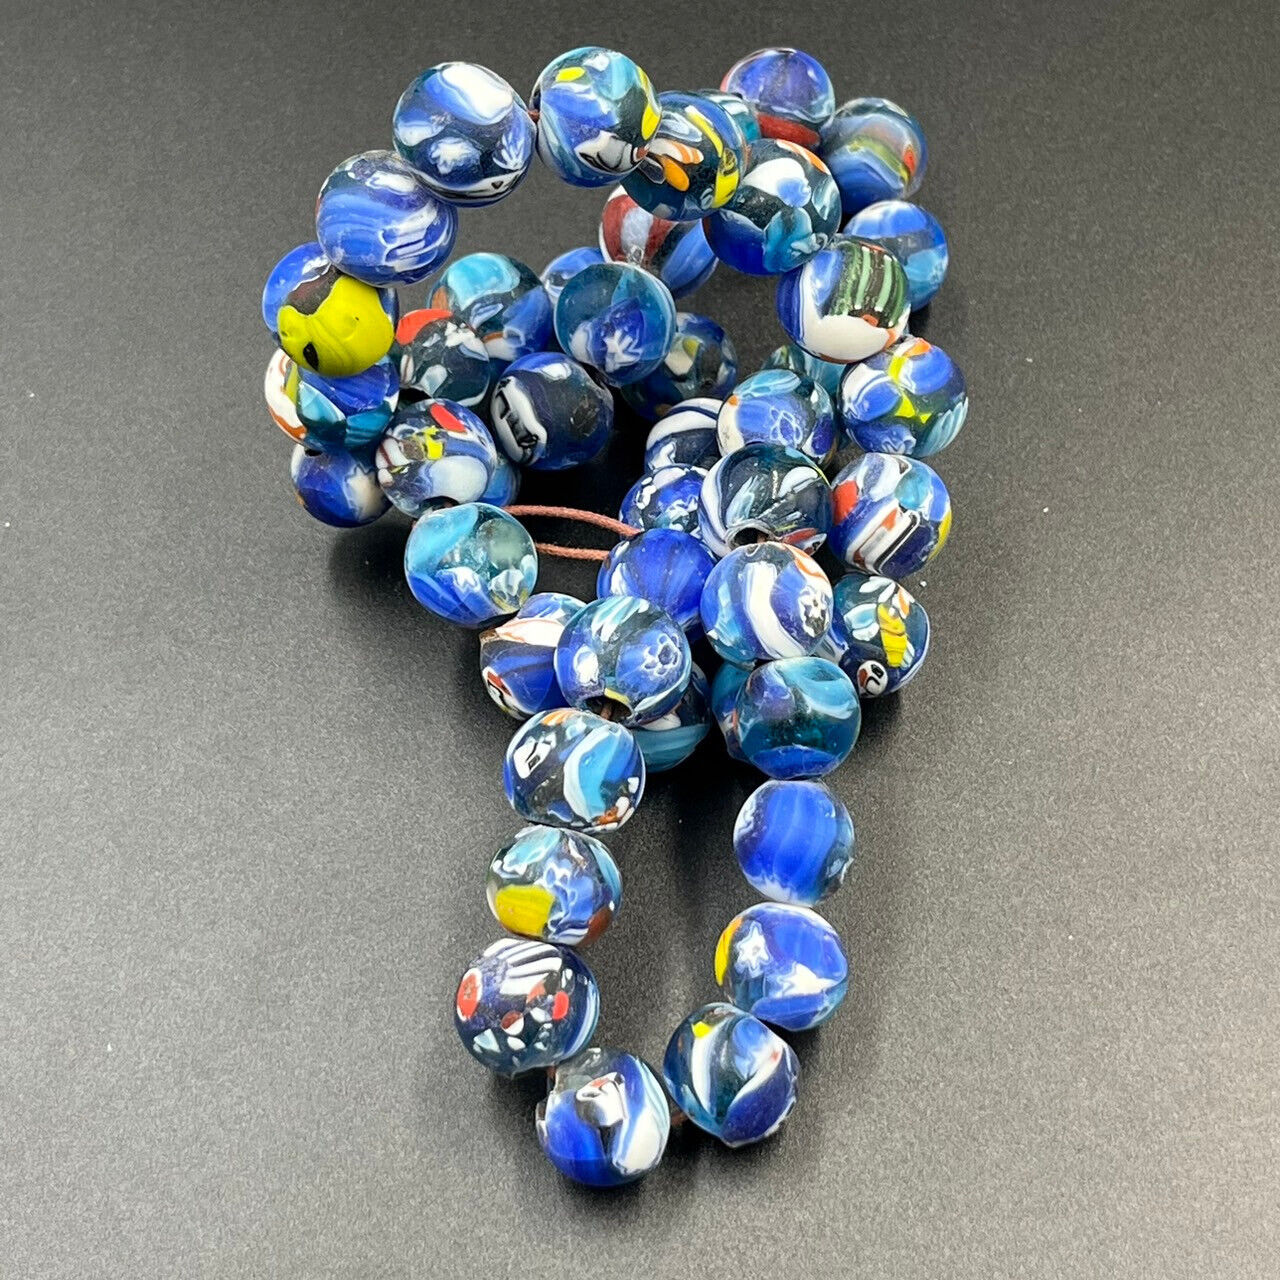 Beautiful Vintage Moroccan Glass Beads, Collectible Glass Beads.